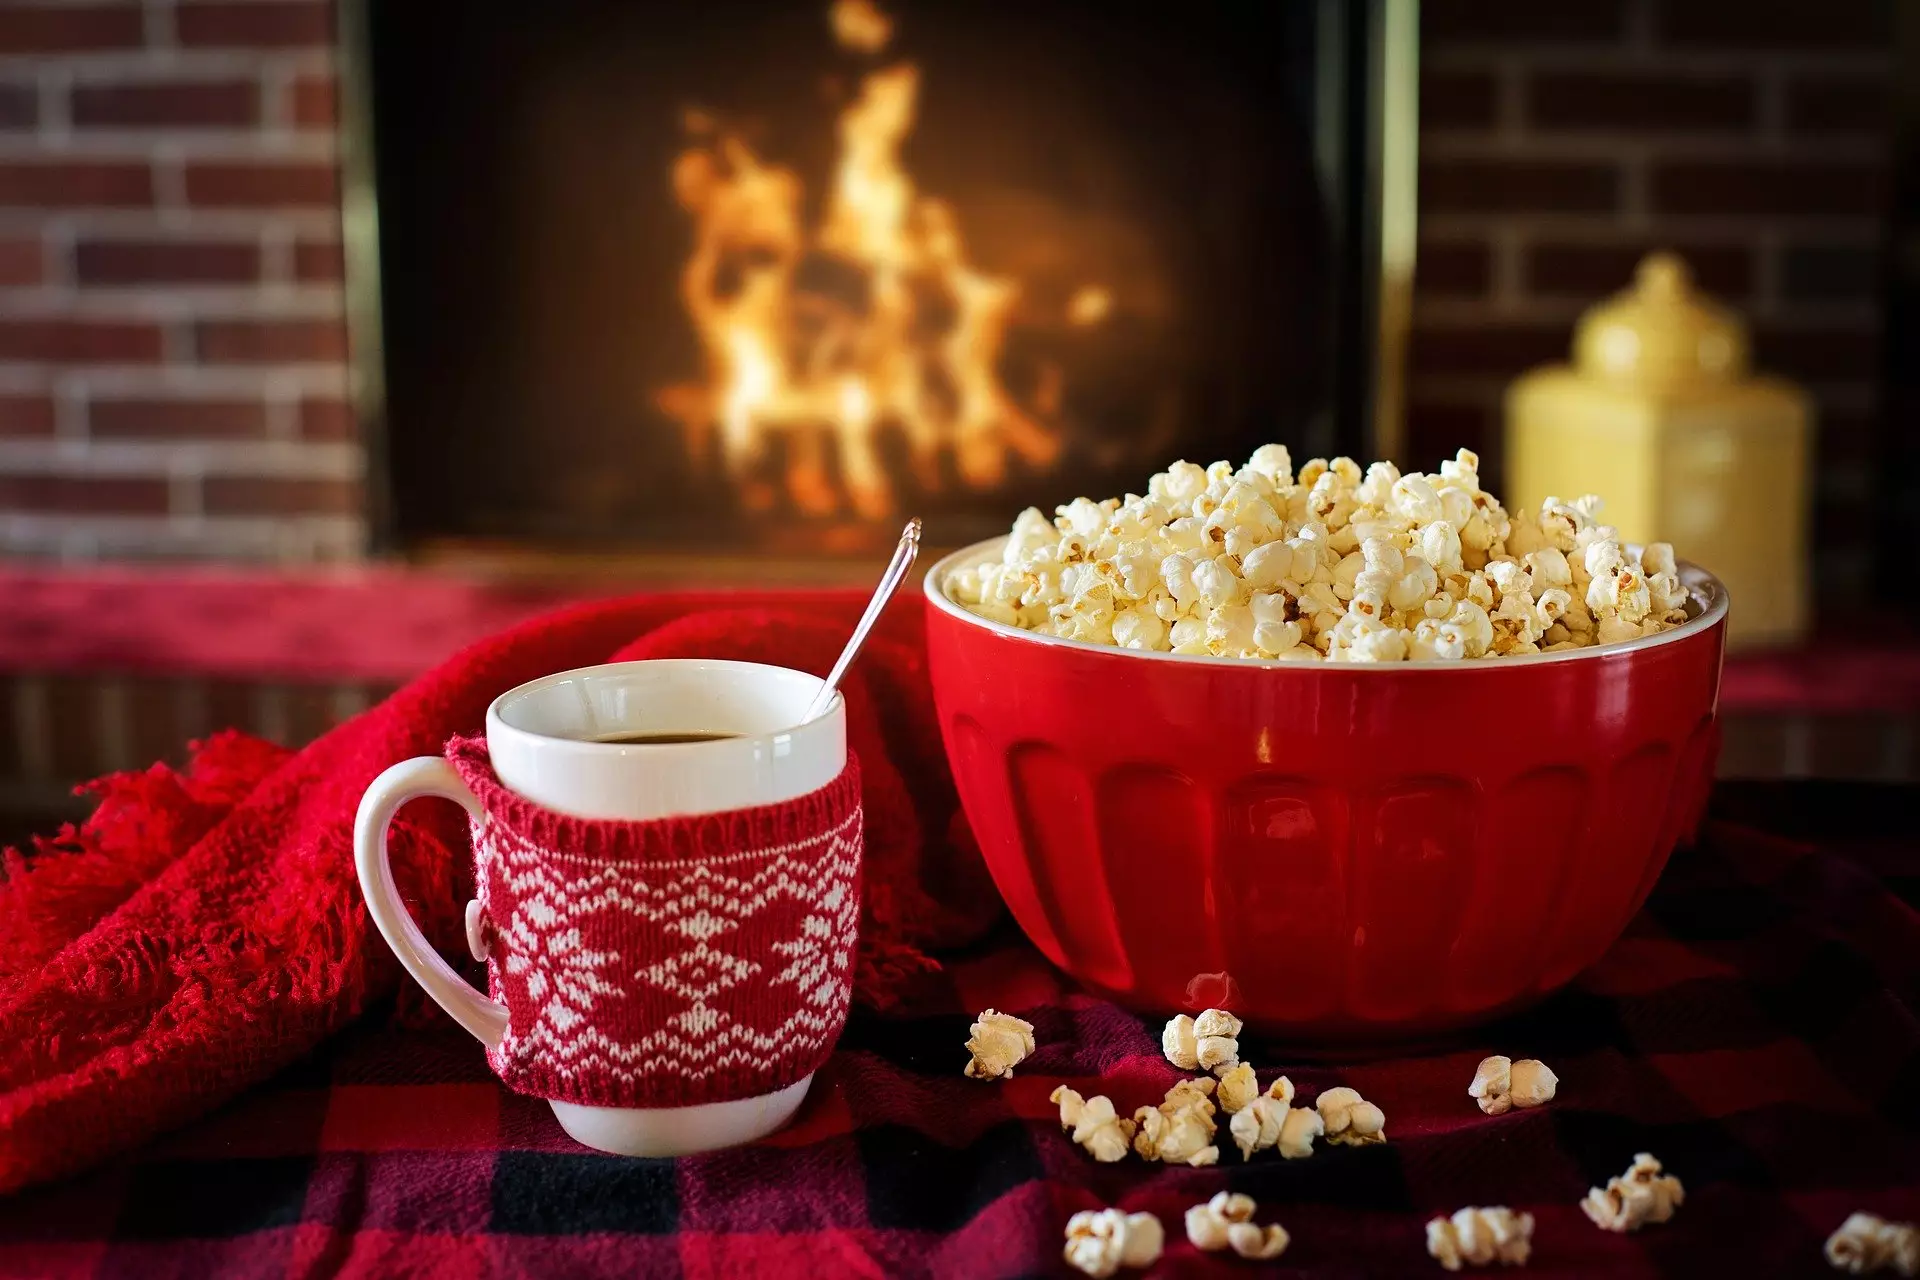 Settling down with a Christmas film can trigger nostalgia (